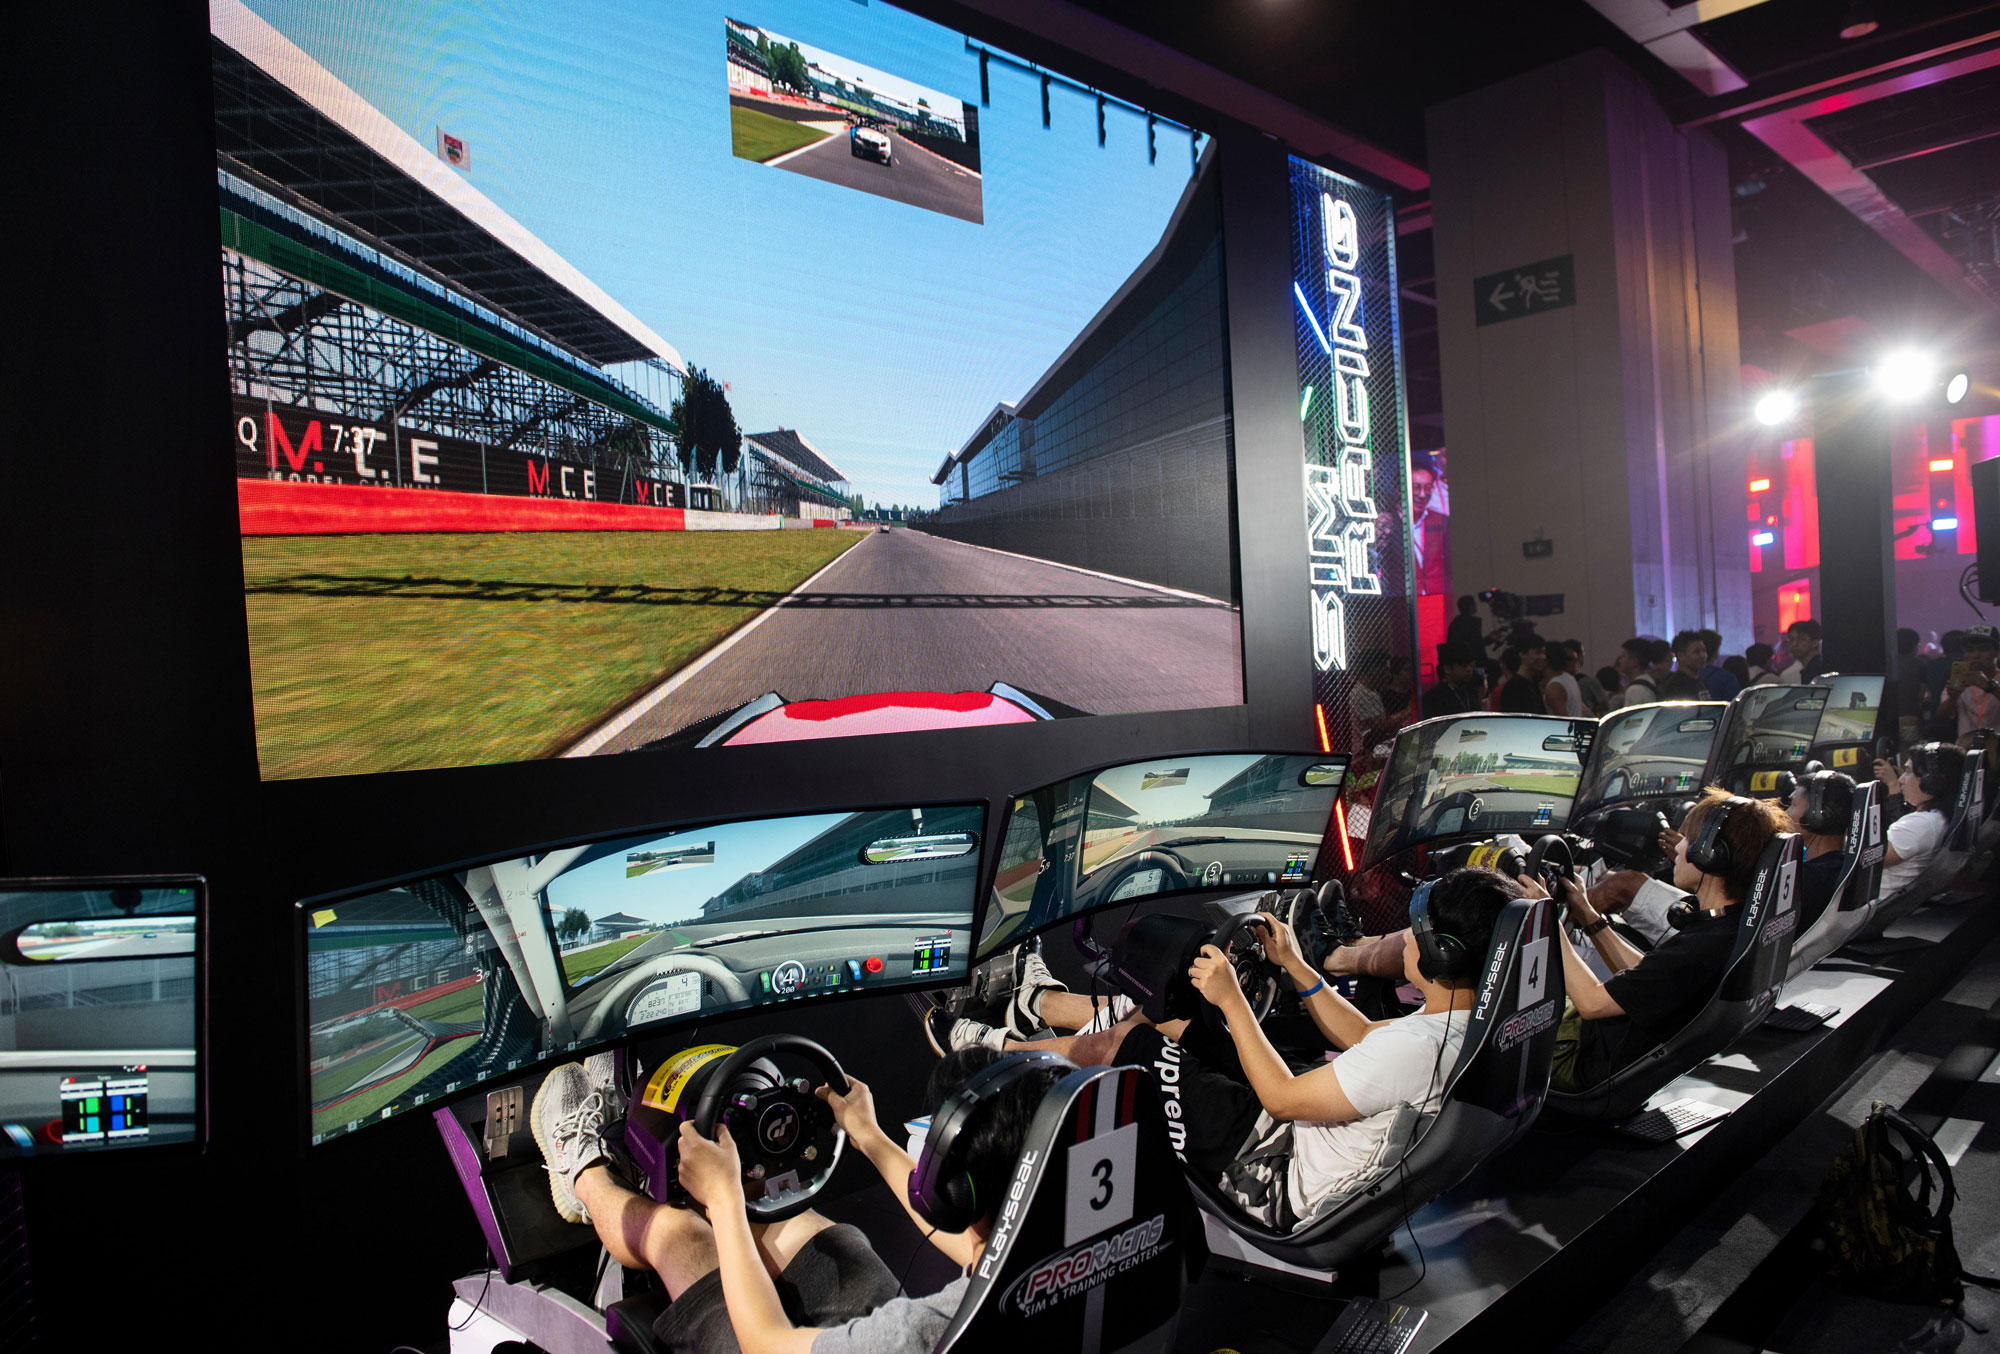 Sim racing drivers competing at a competitive championship